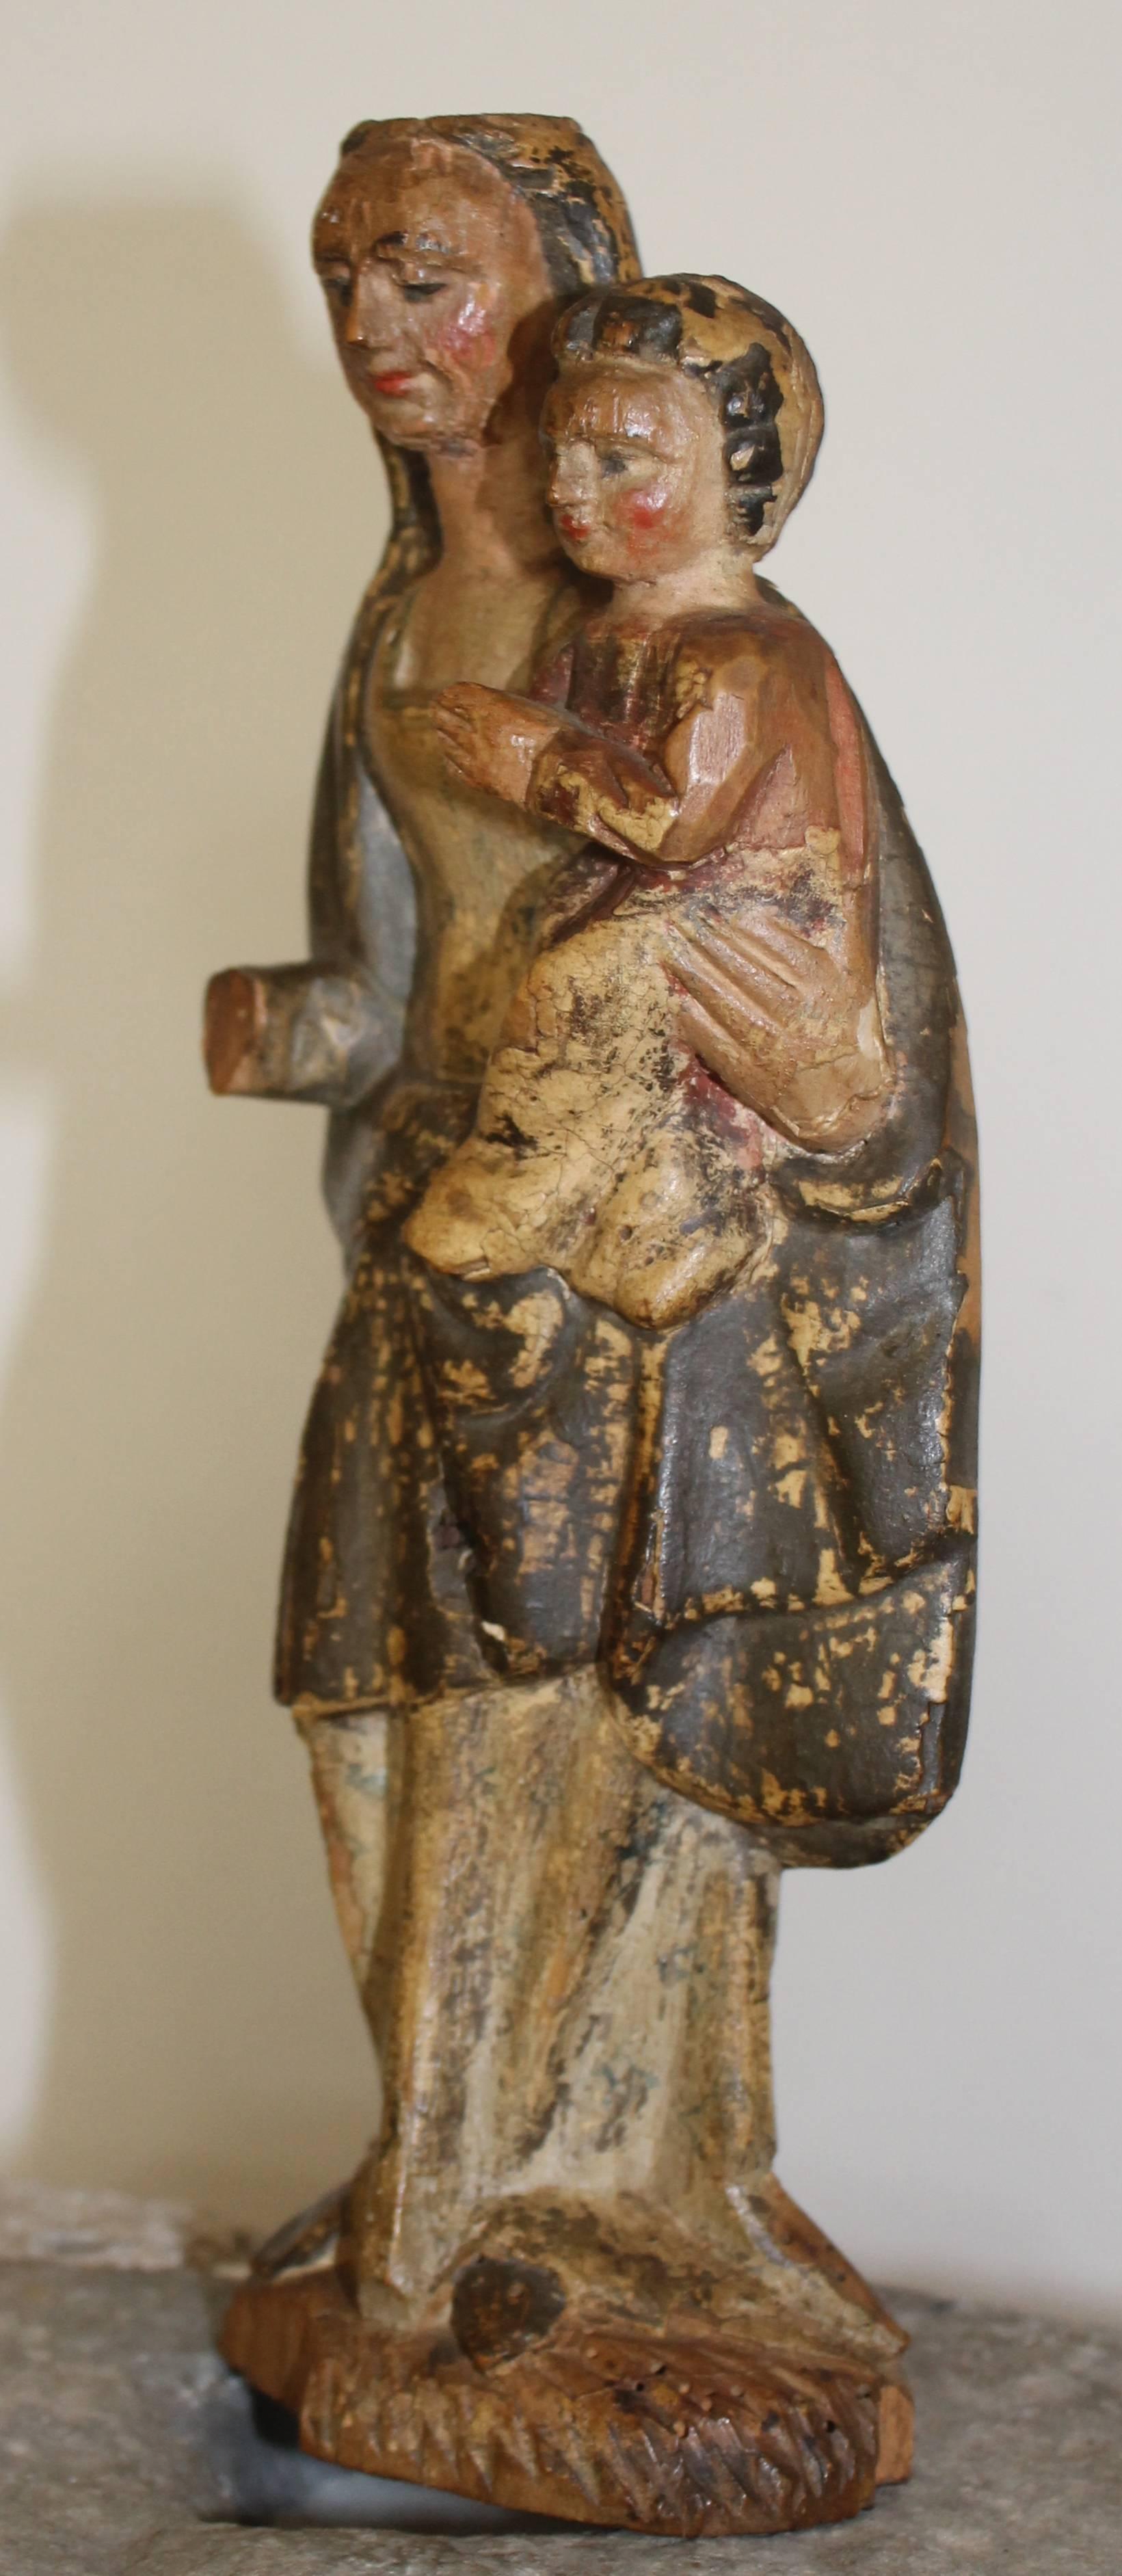 Wood carved Madonna with child. Rests of polychrome, early 17th century.
Spanish or Flemish.